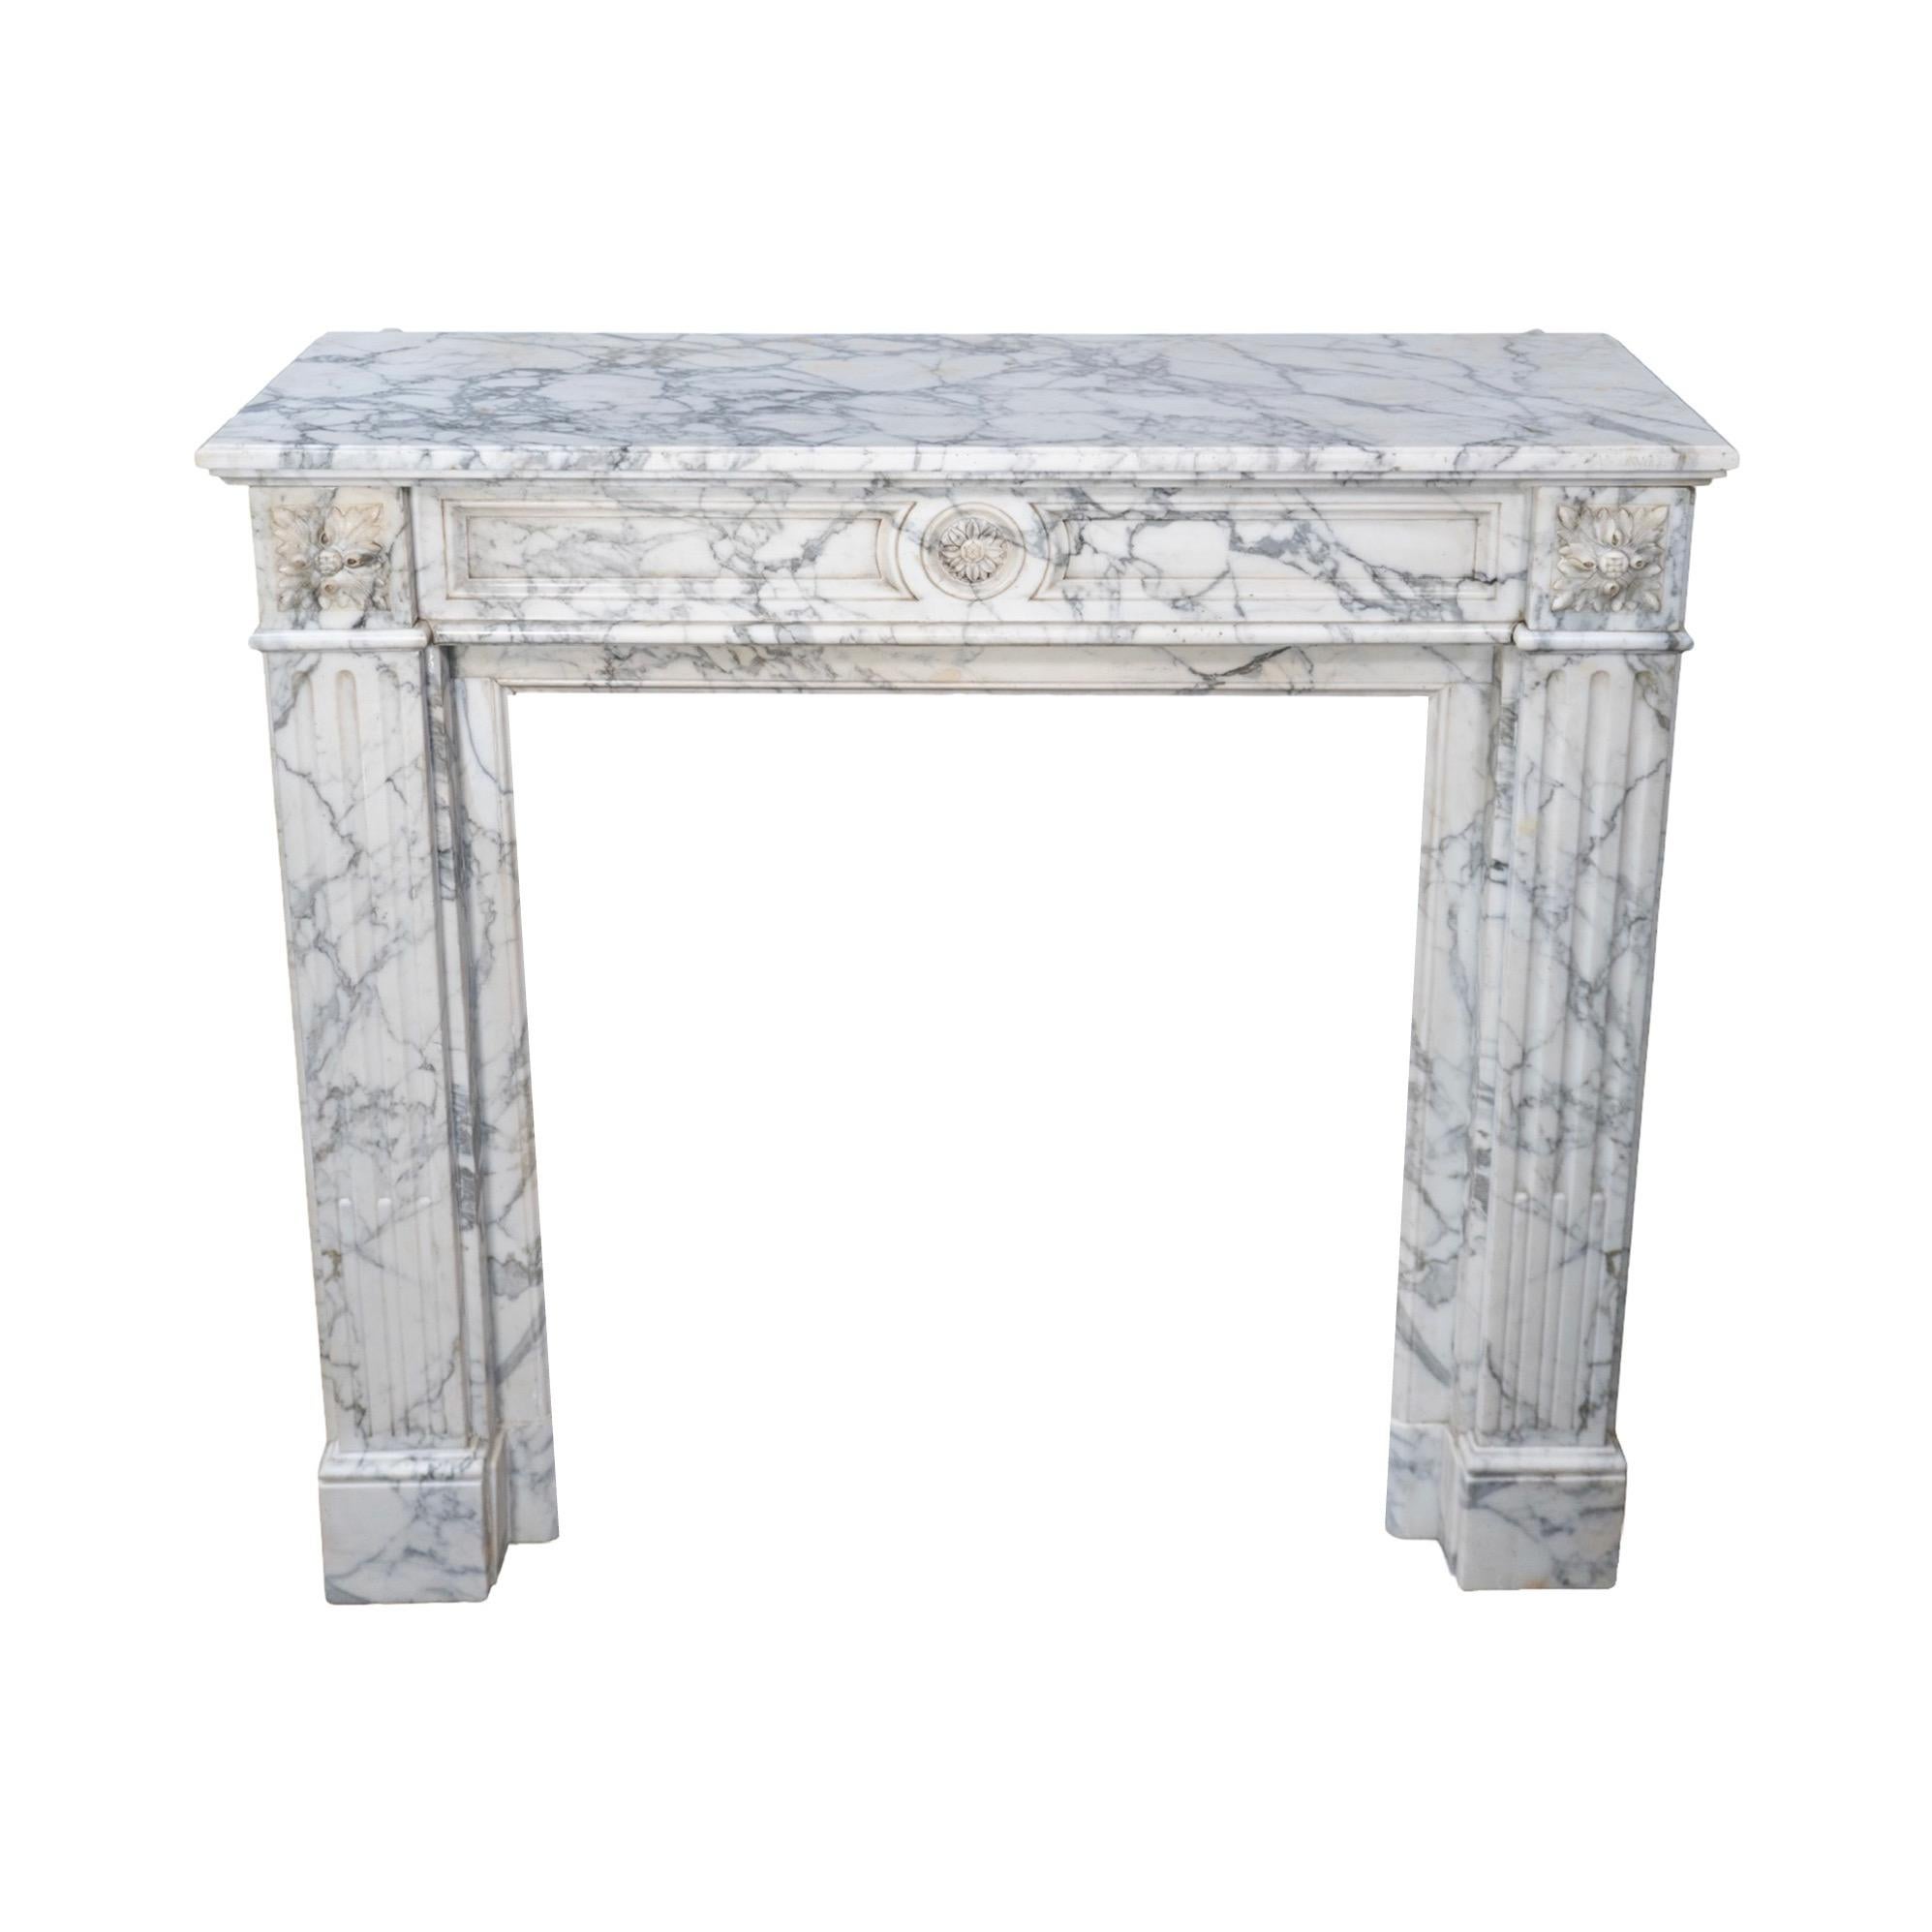 Expertly crafted from luxurious French White Veined Carrara Marble, this mantel exudes elegance and sophistication. With intricate carved floral motifs and bolection style carvings, it is a stunning representation of the Louis XVI style. Dating back